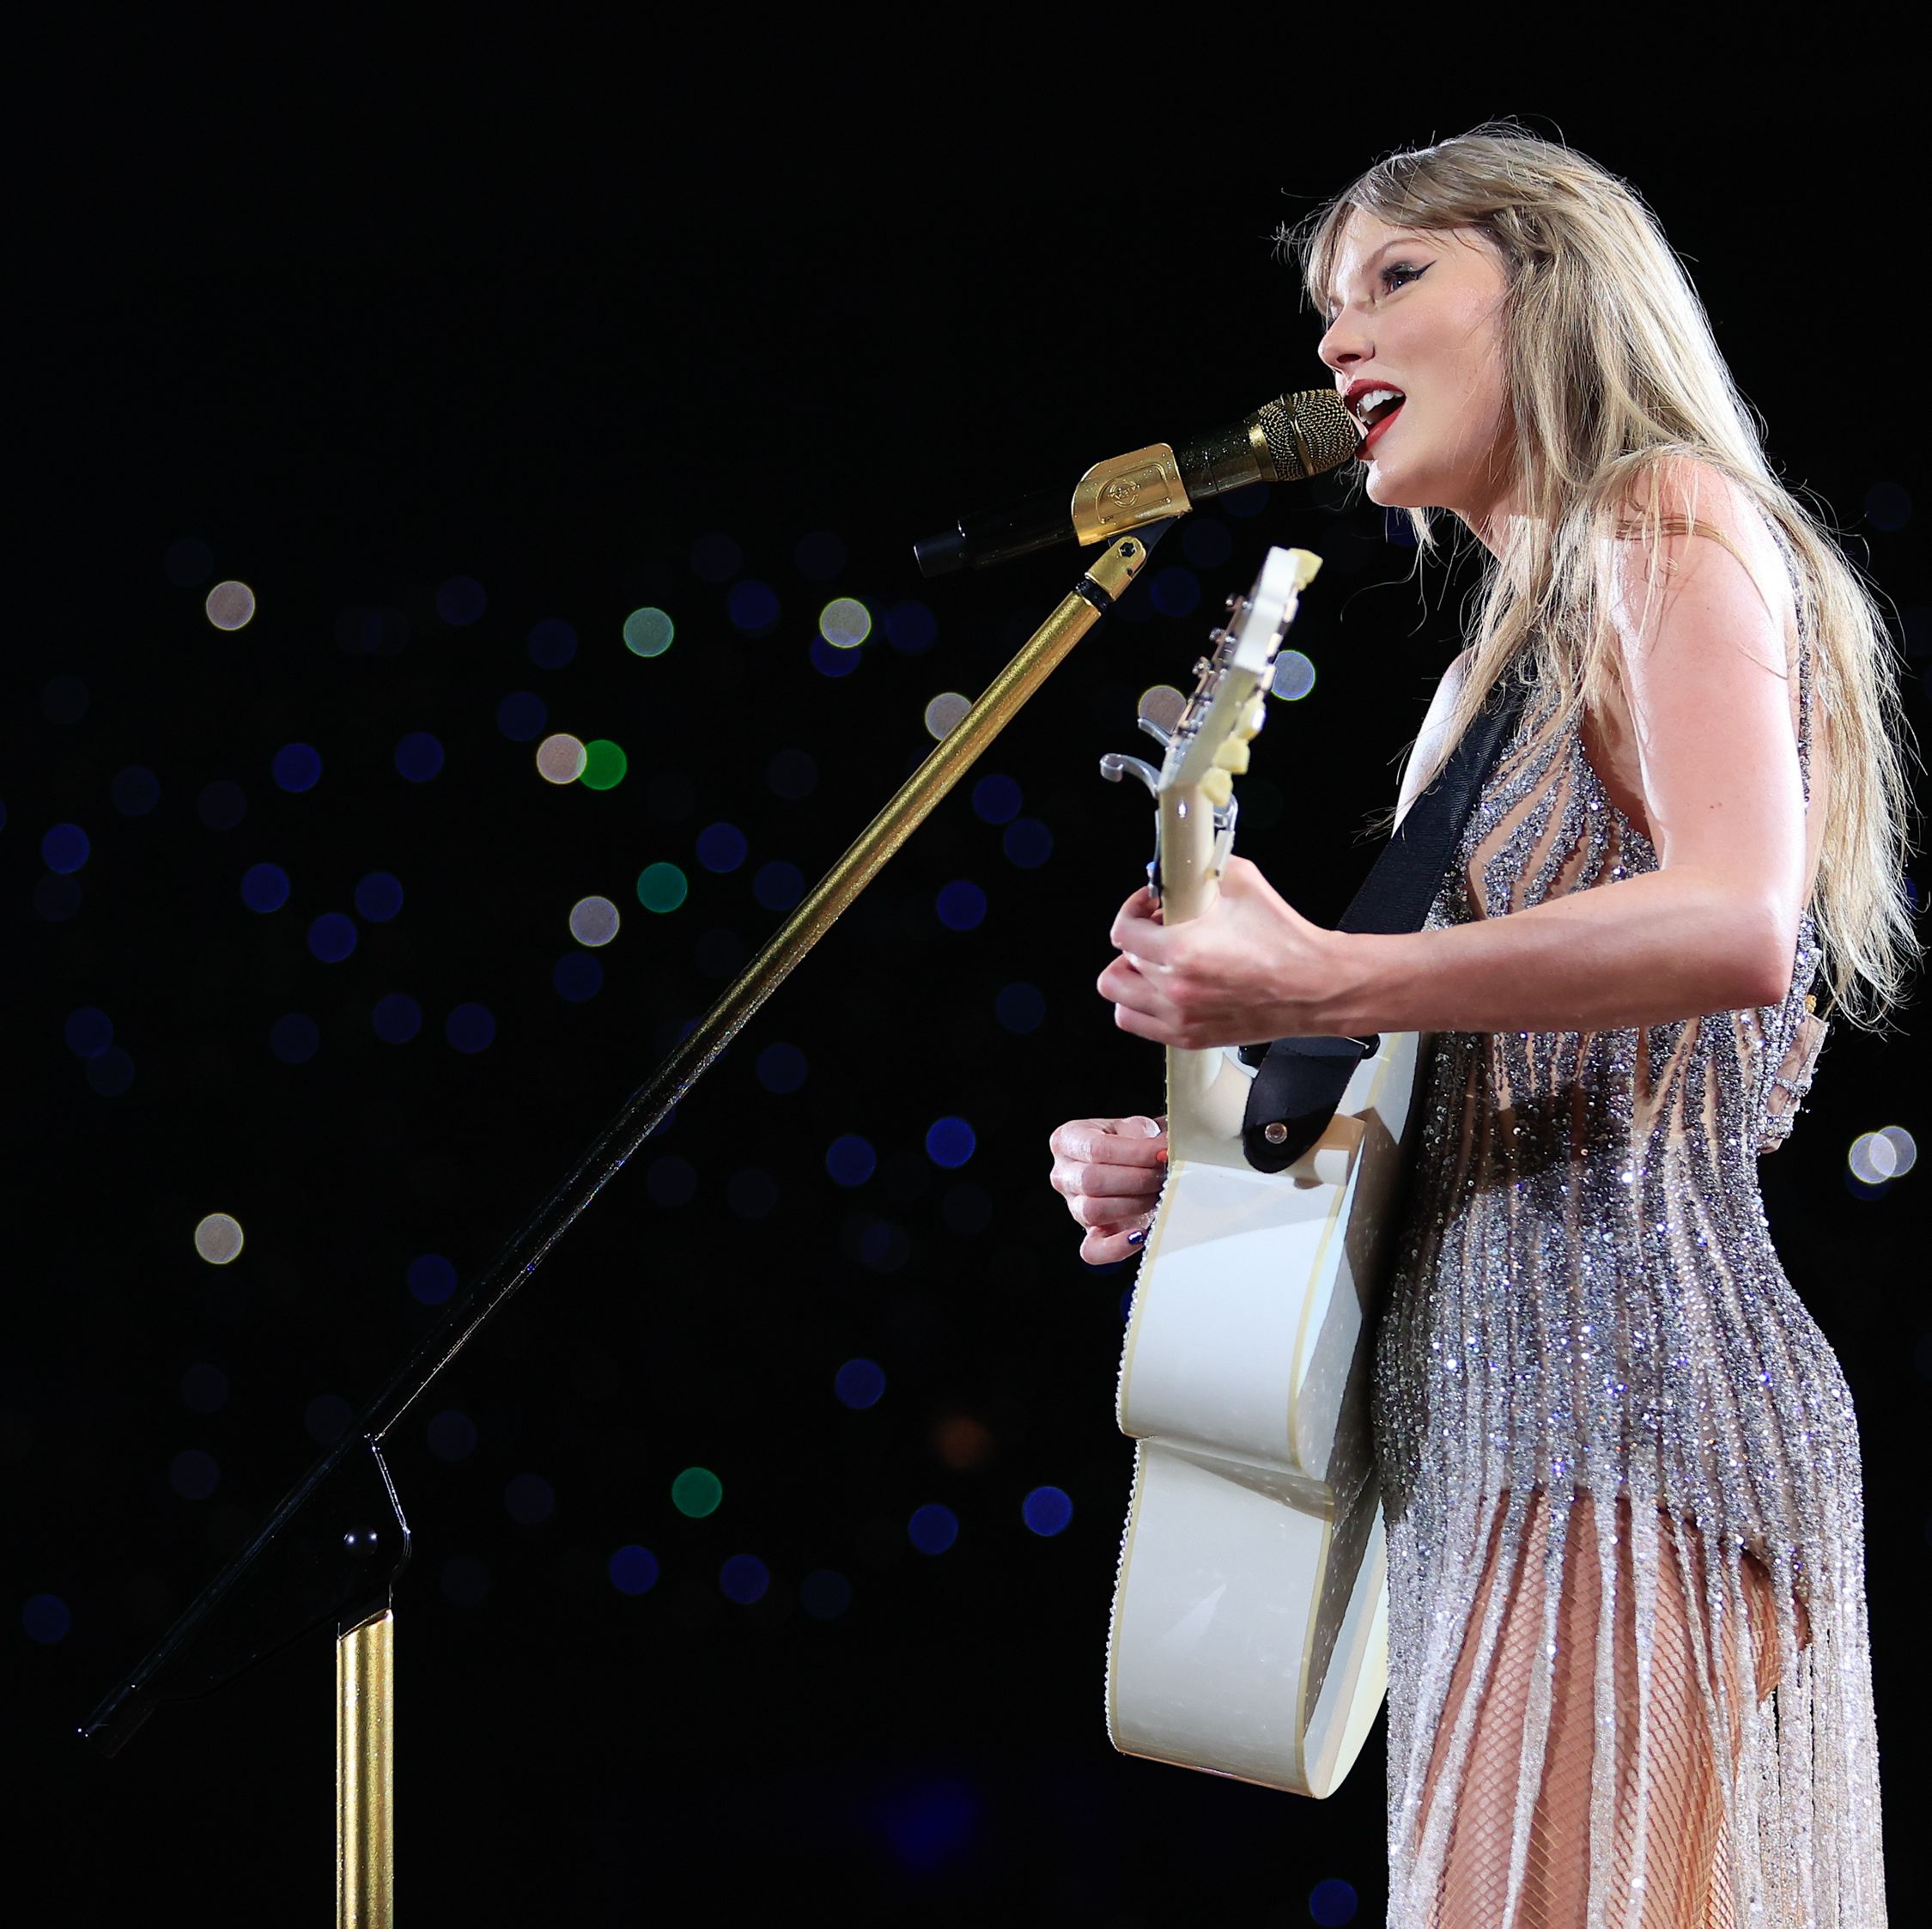 Plans have changed since tragedy struck Swift's tour last week.